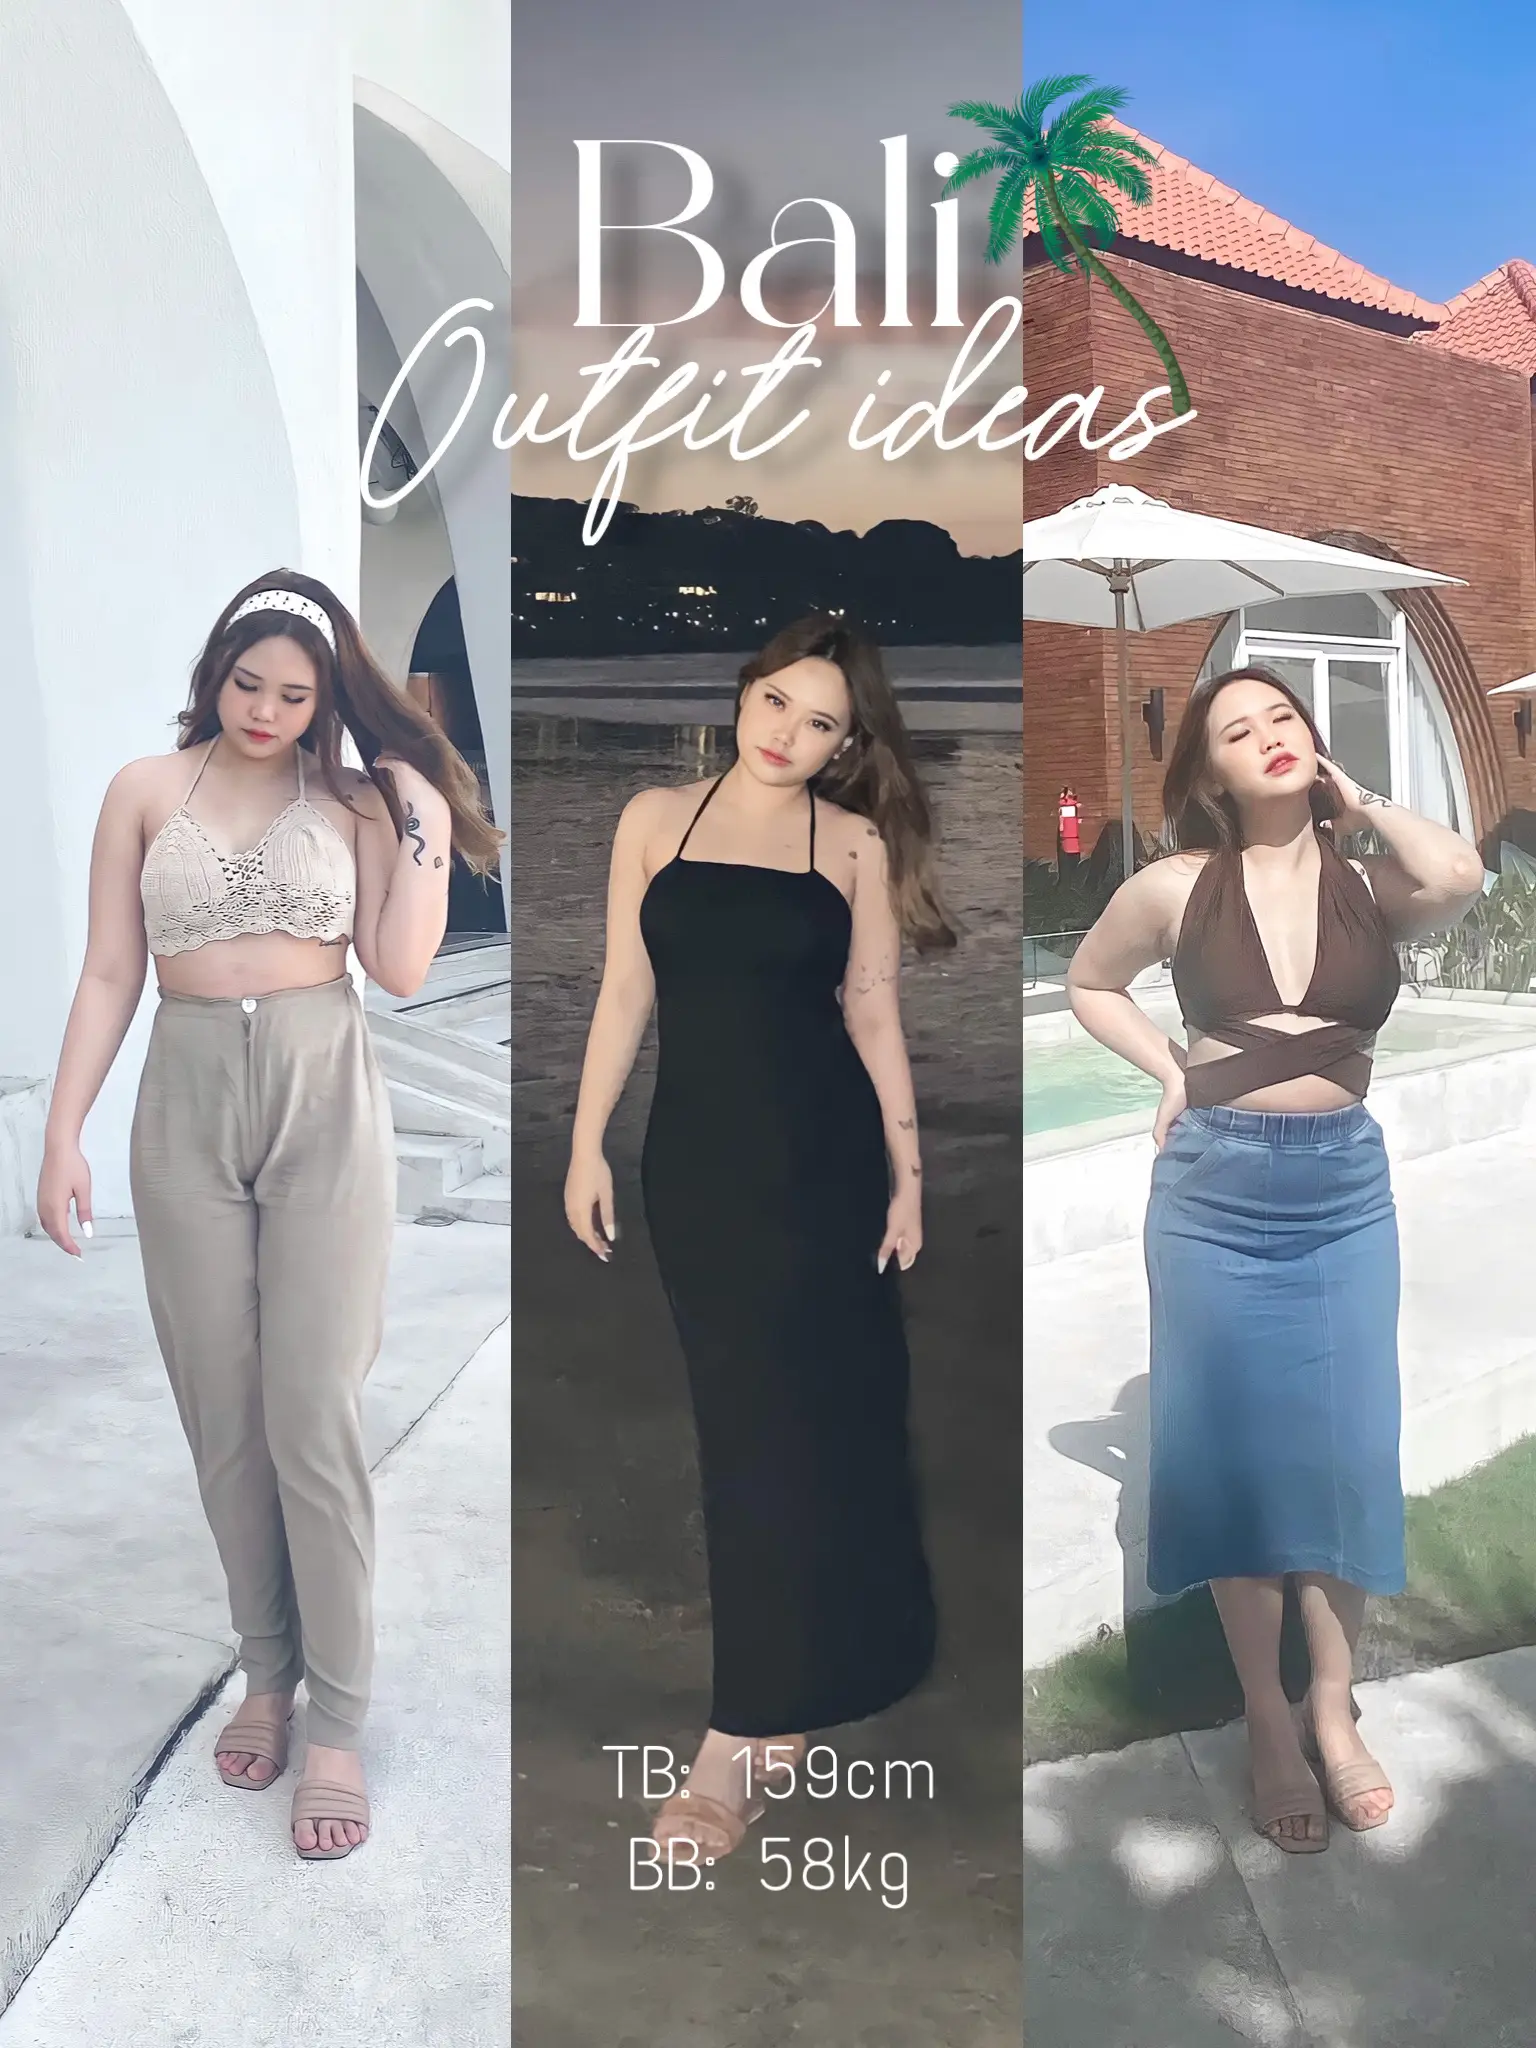 🏝 BALI OUTFIT IDEAS🥥, Gallery posted by devi bby 🥀